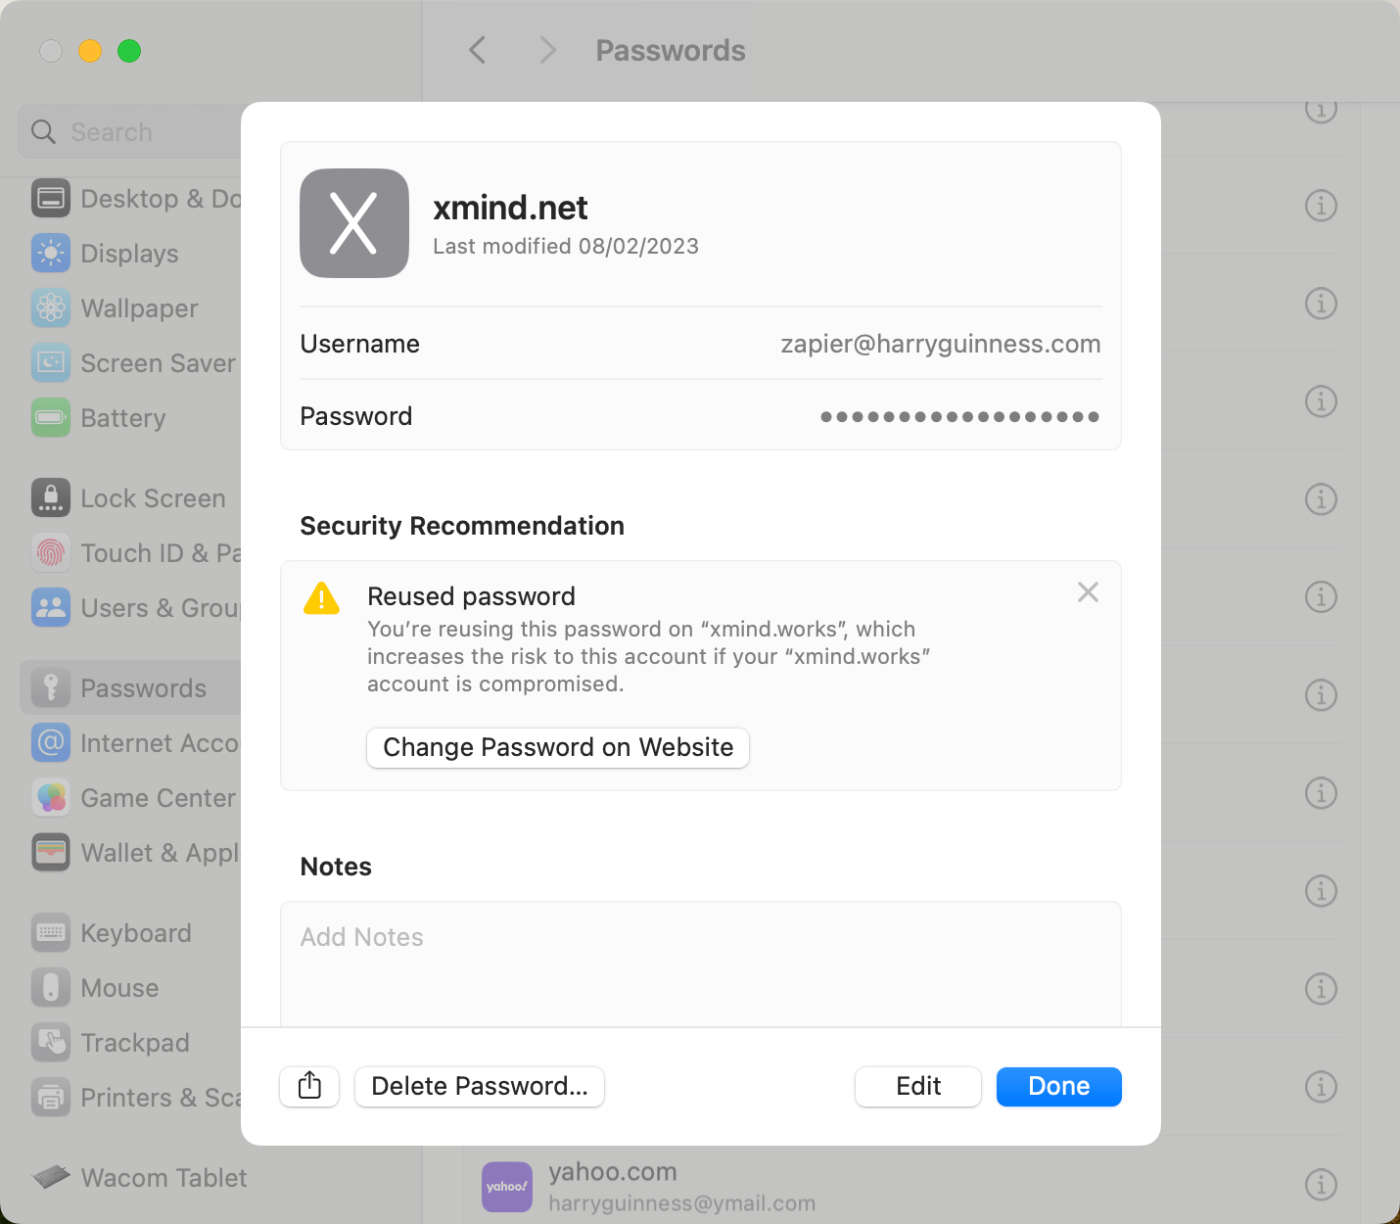 iCloud Keychain, our pick for the best productivity app for managing your passwords.